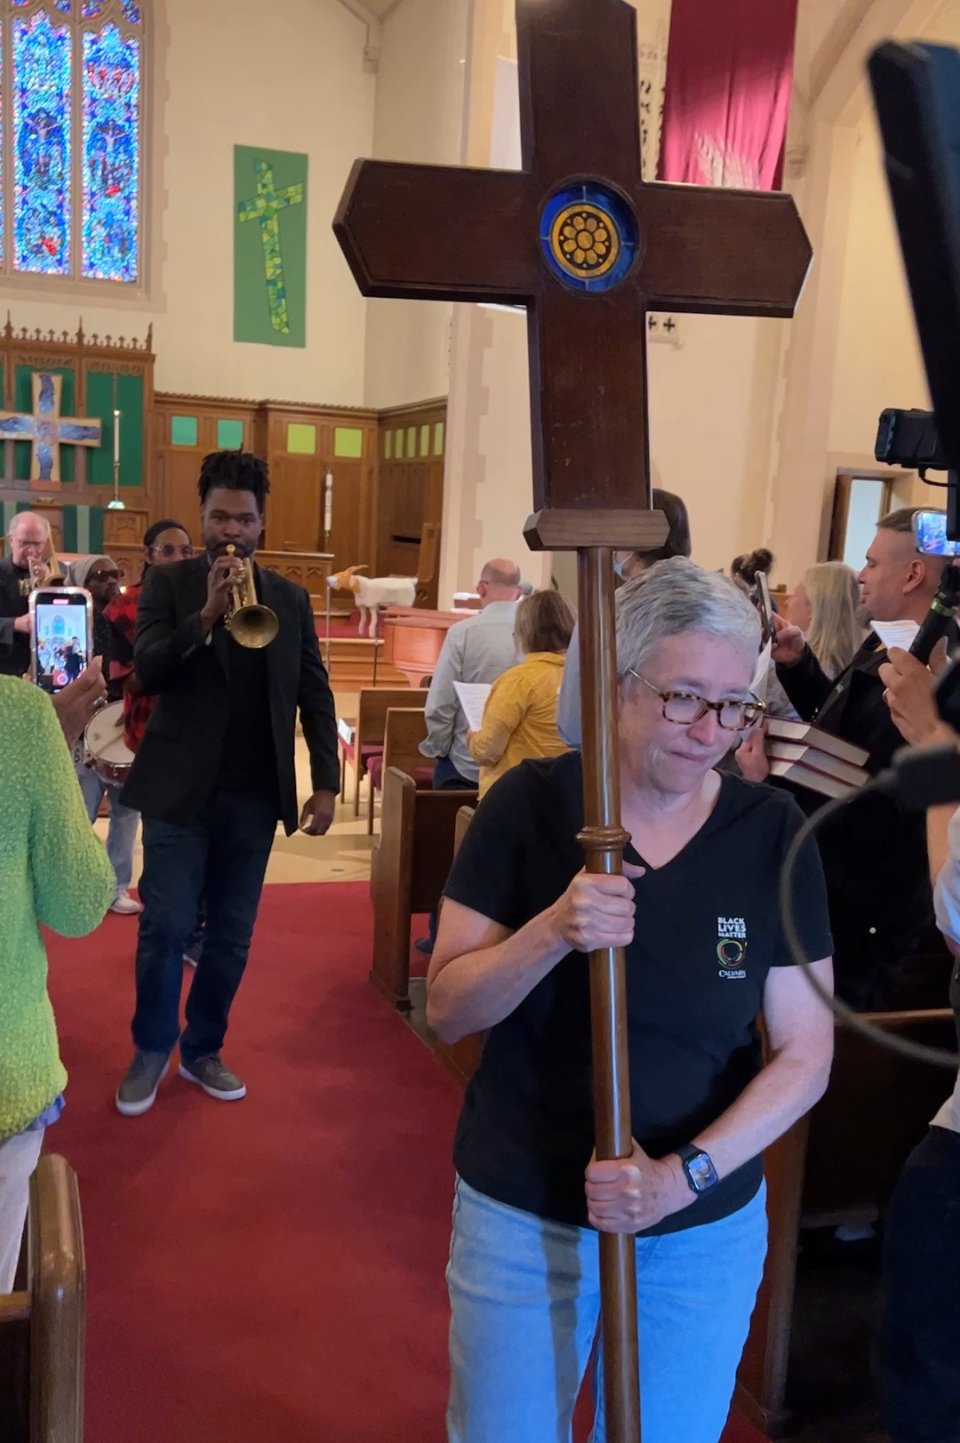 Shari Seifert, carrying the processional cross at the end of the service on September 11, sees the project to bring deeply affordable housing to 39th and Chicago as demonstrating “tremendous care for neighbor.” Behind her, Butchy Austin leads Brass Solidarity down the aisle.